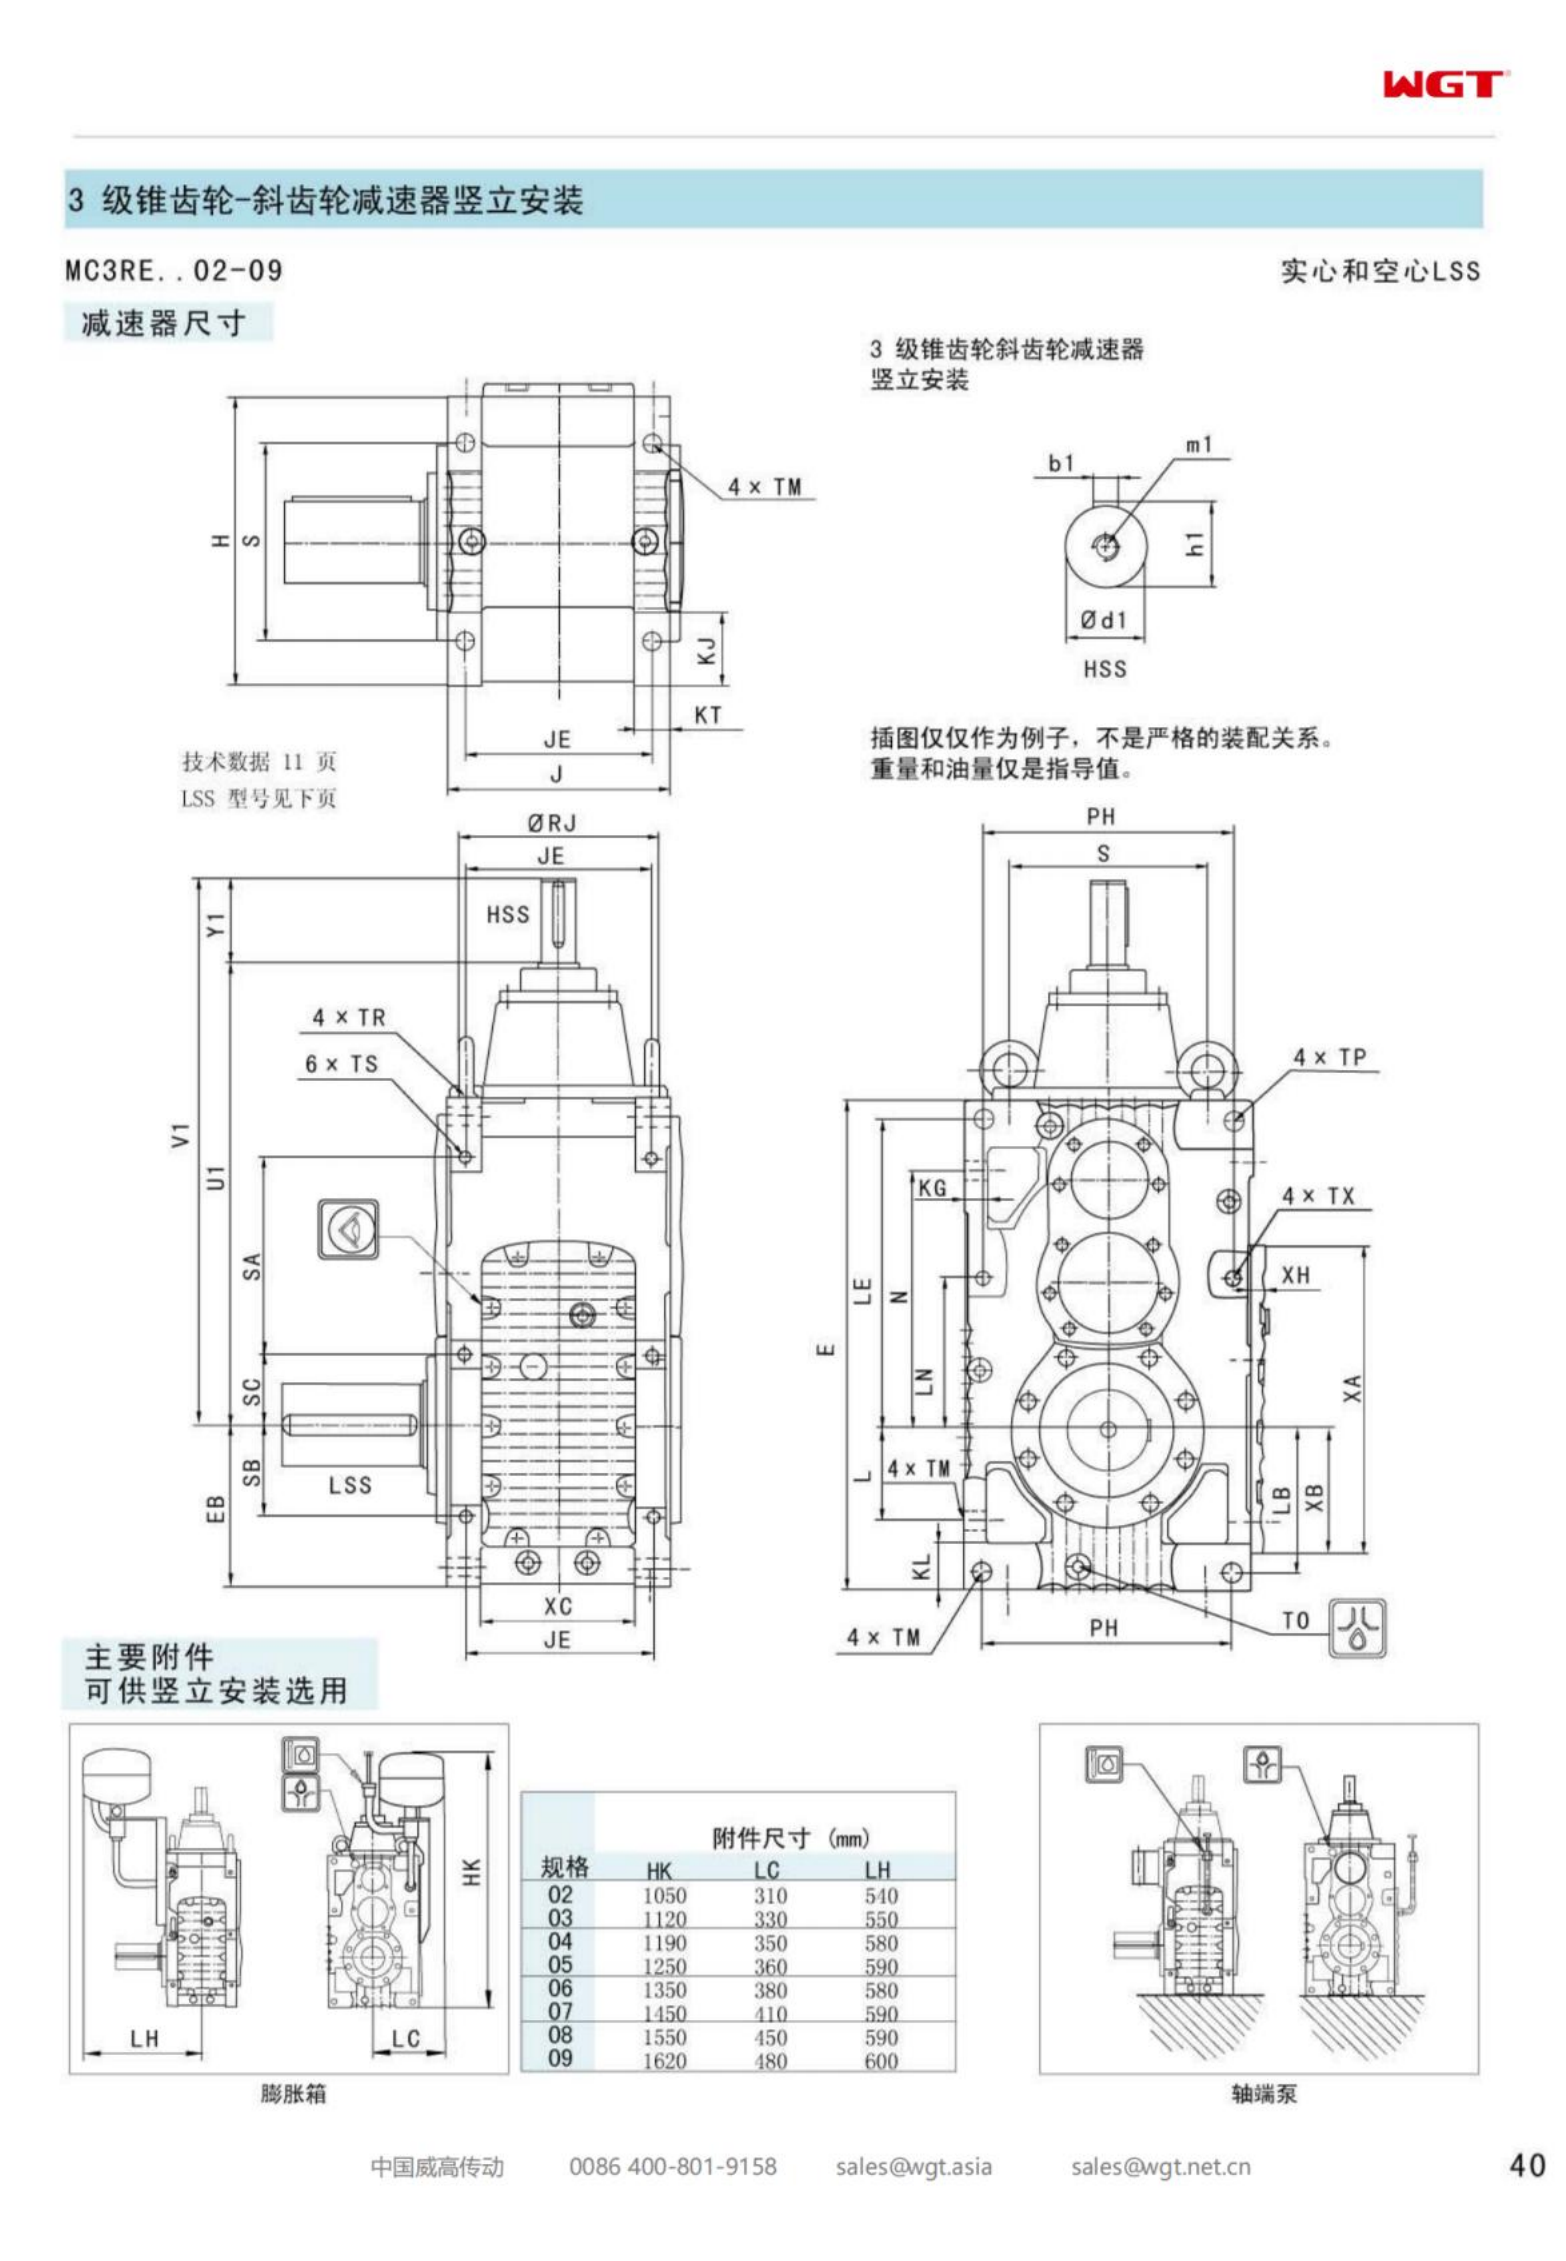 MC3RESF08 Replace_SEW_MC_Series Gearbox